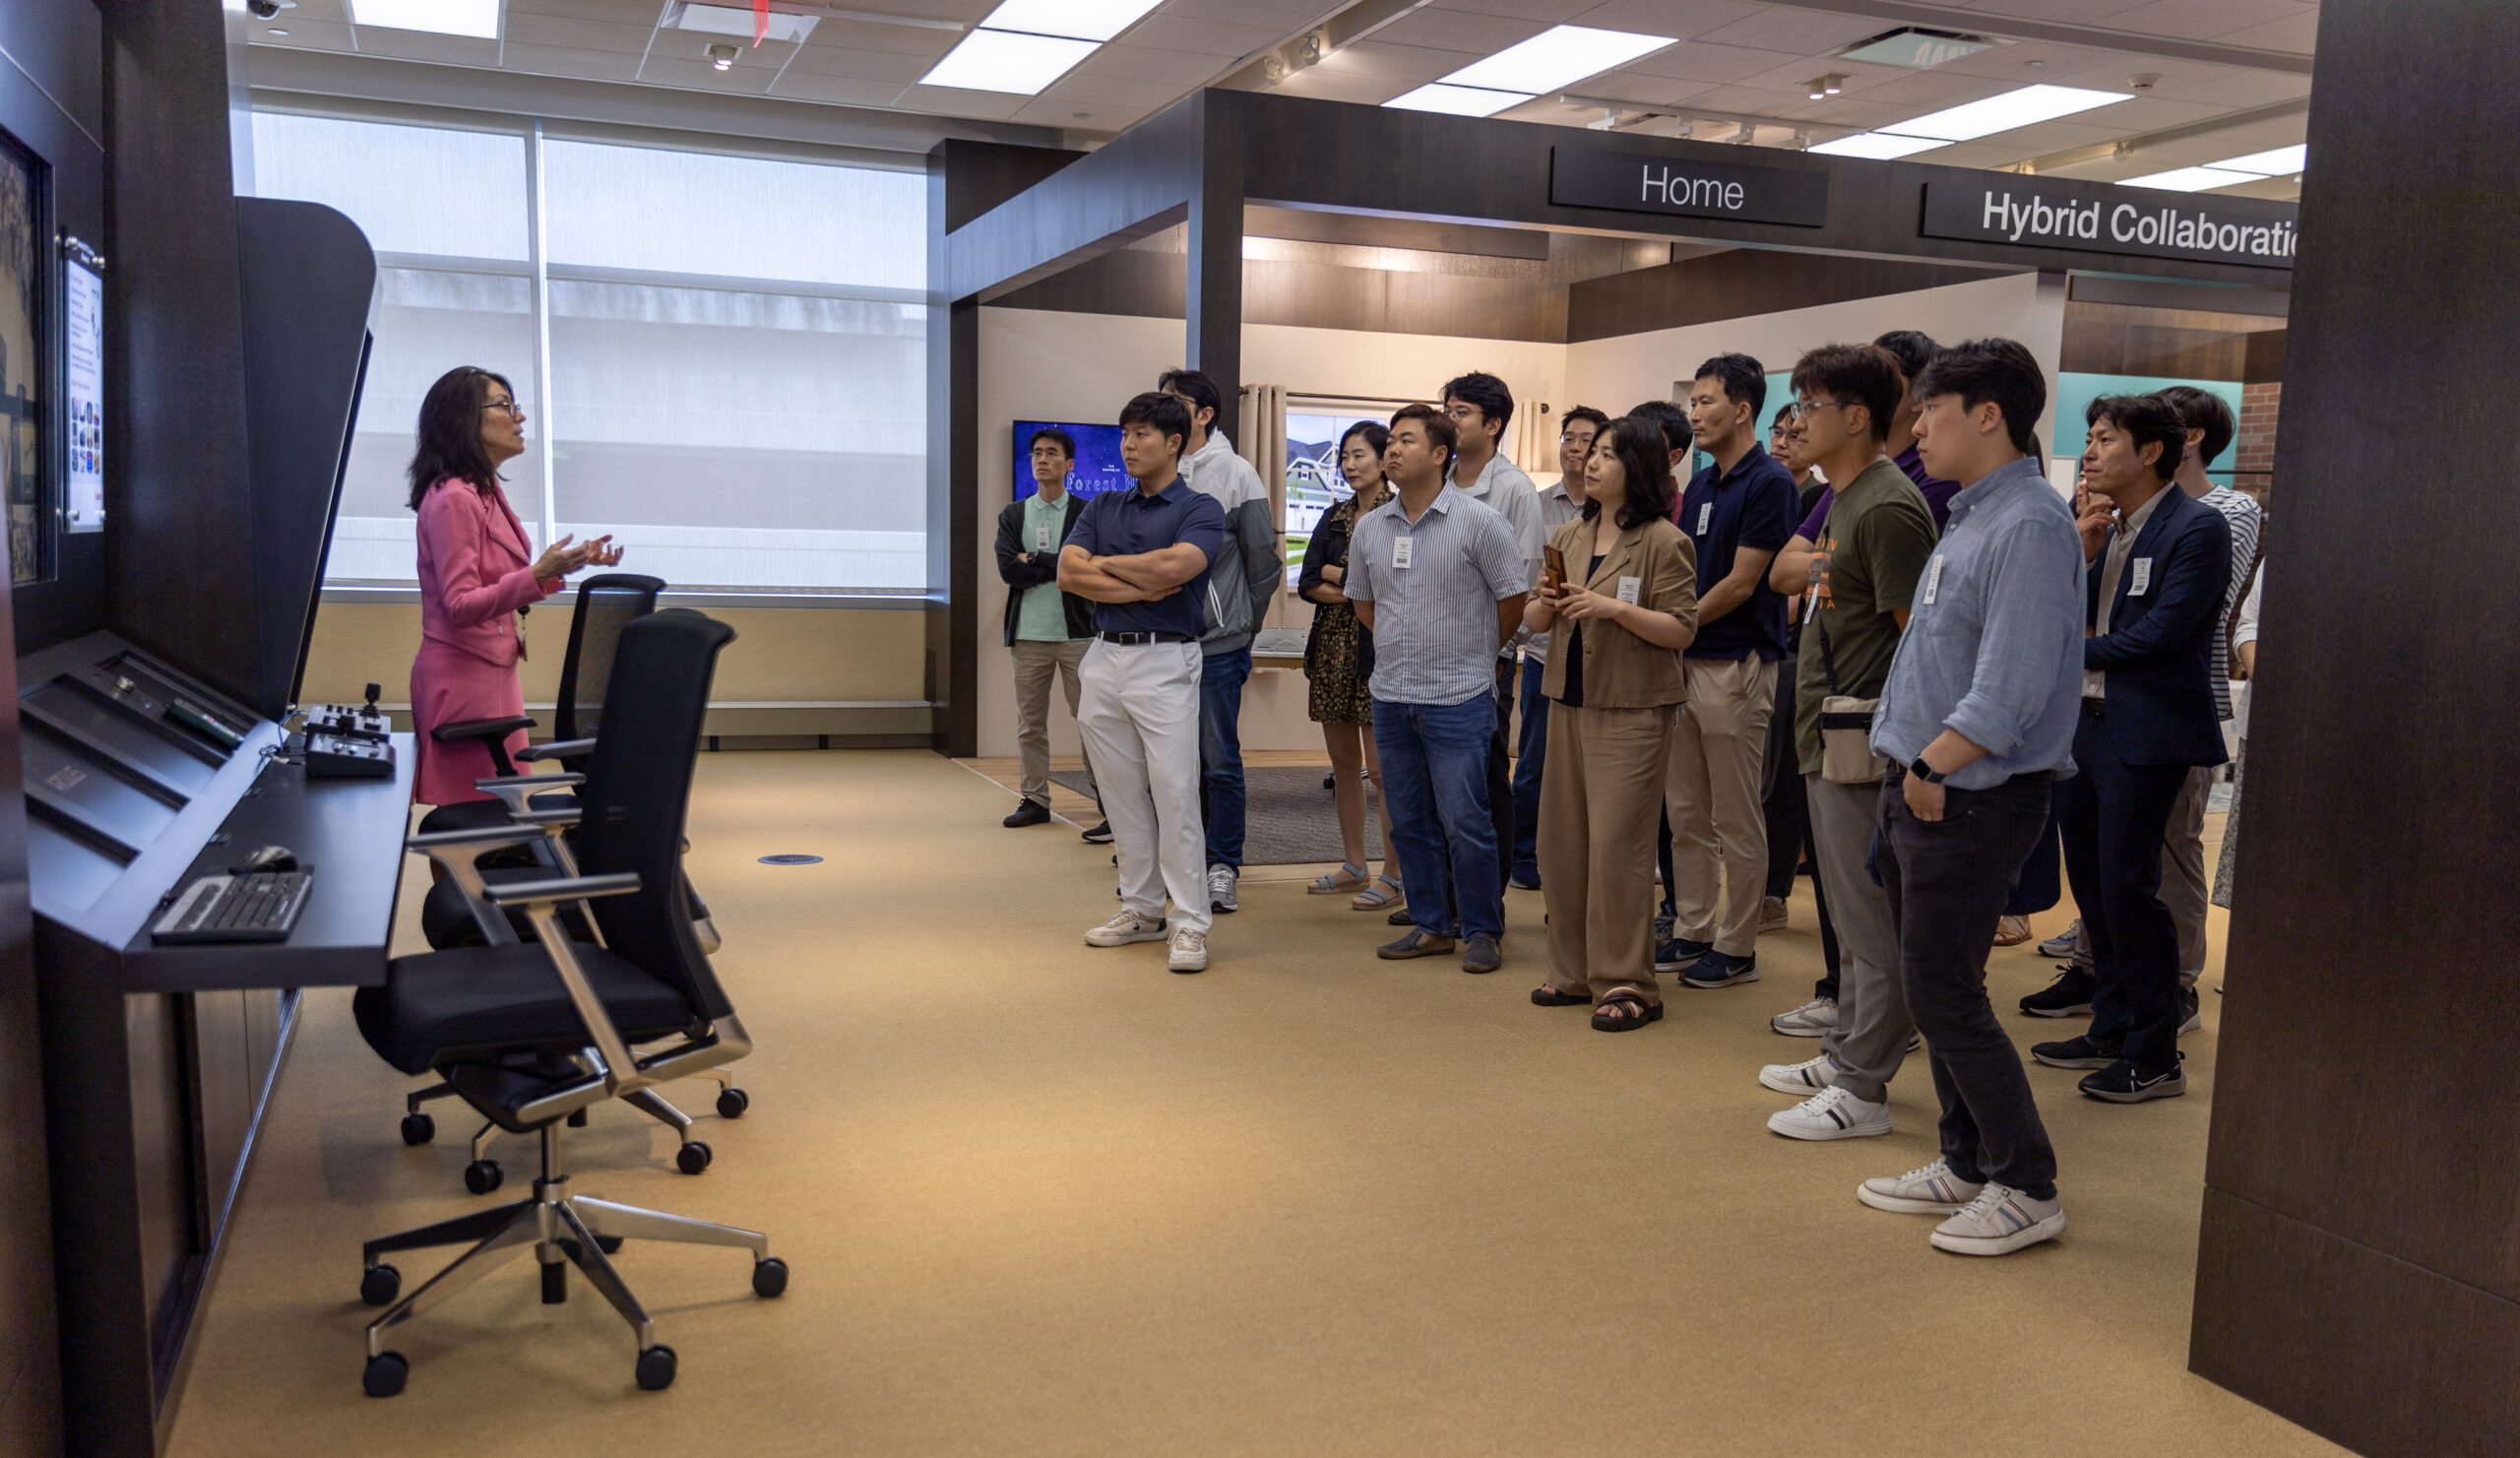 Canon U.S.A., Inc. Offers Showroom Tour and Demonstrations for Stony Brook University Students